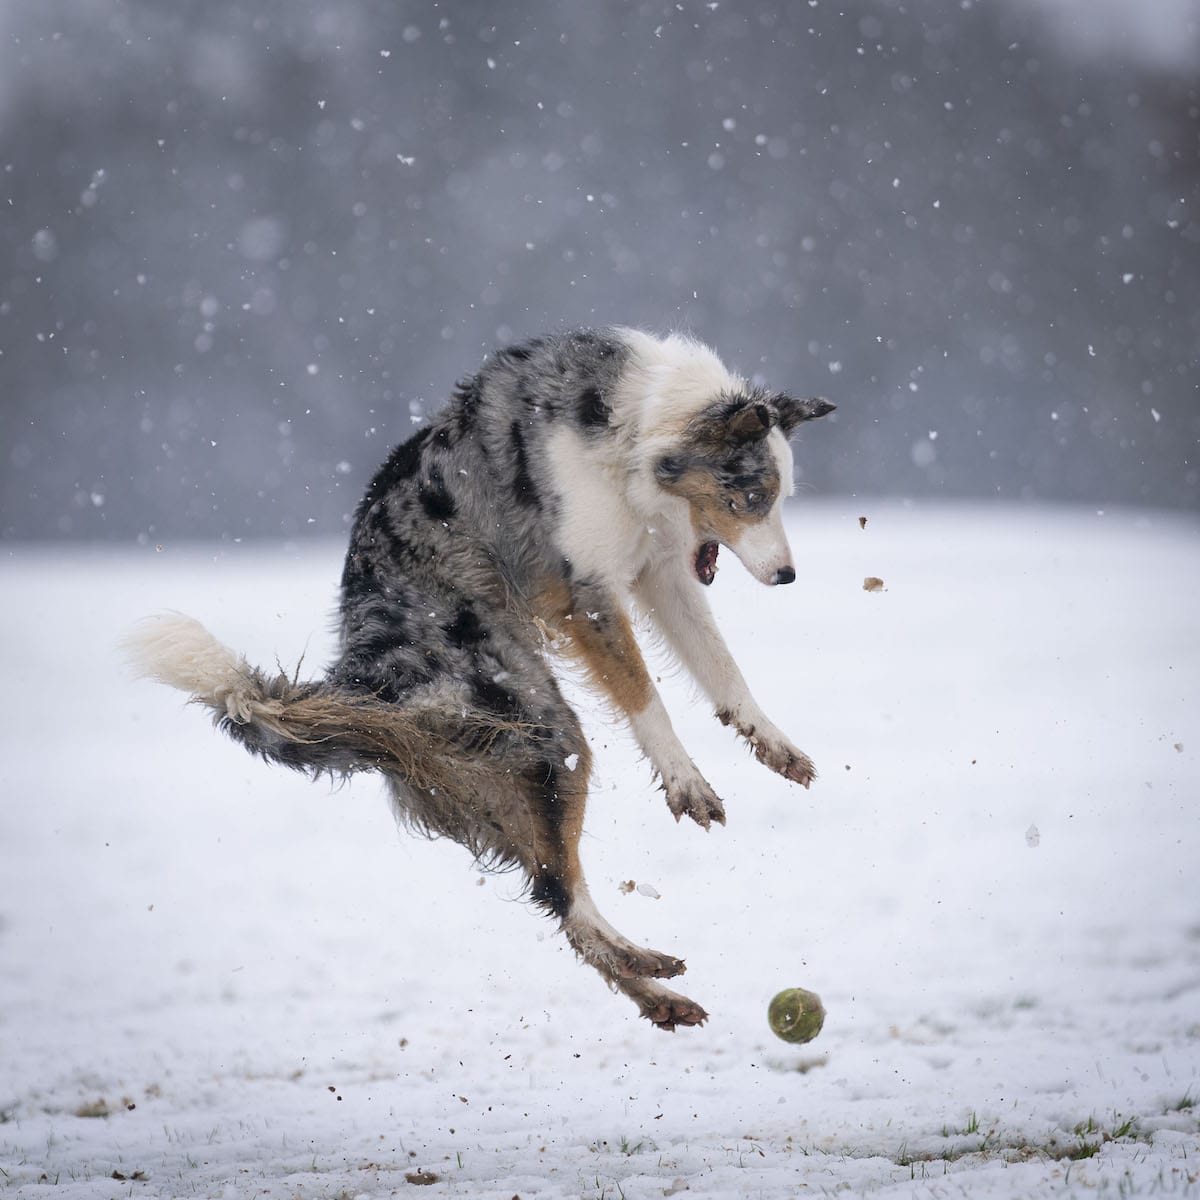 Dog in a Snowy Field Jumping at a Tennis Ball